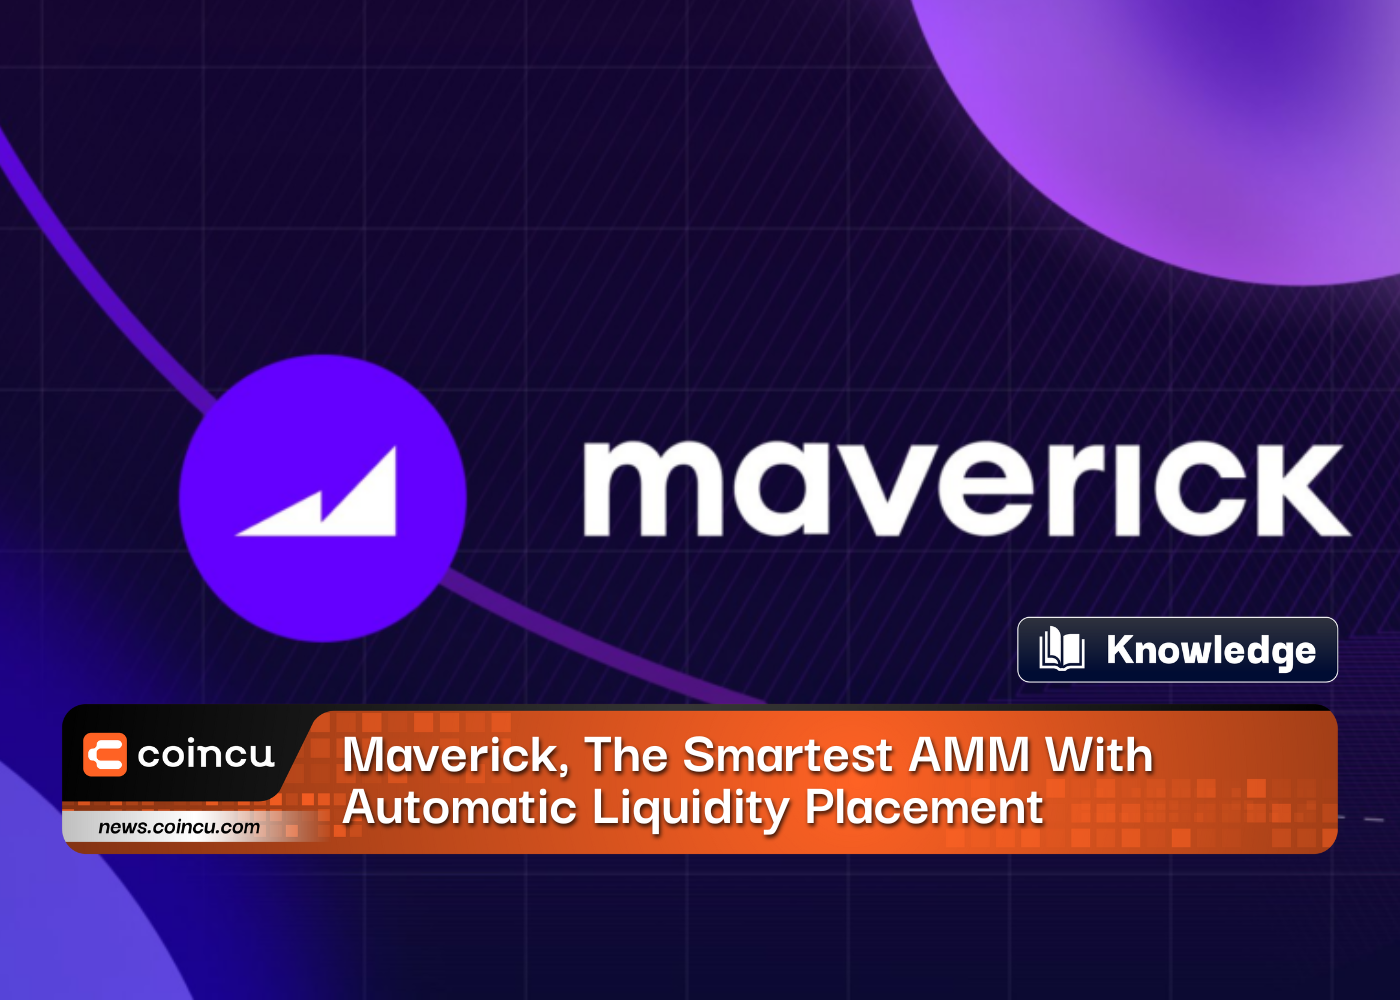 Maverick, The Smartest AMM With Breakthrough Automatic Liquidity Placement